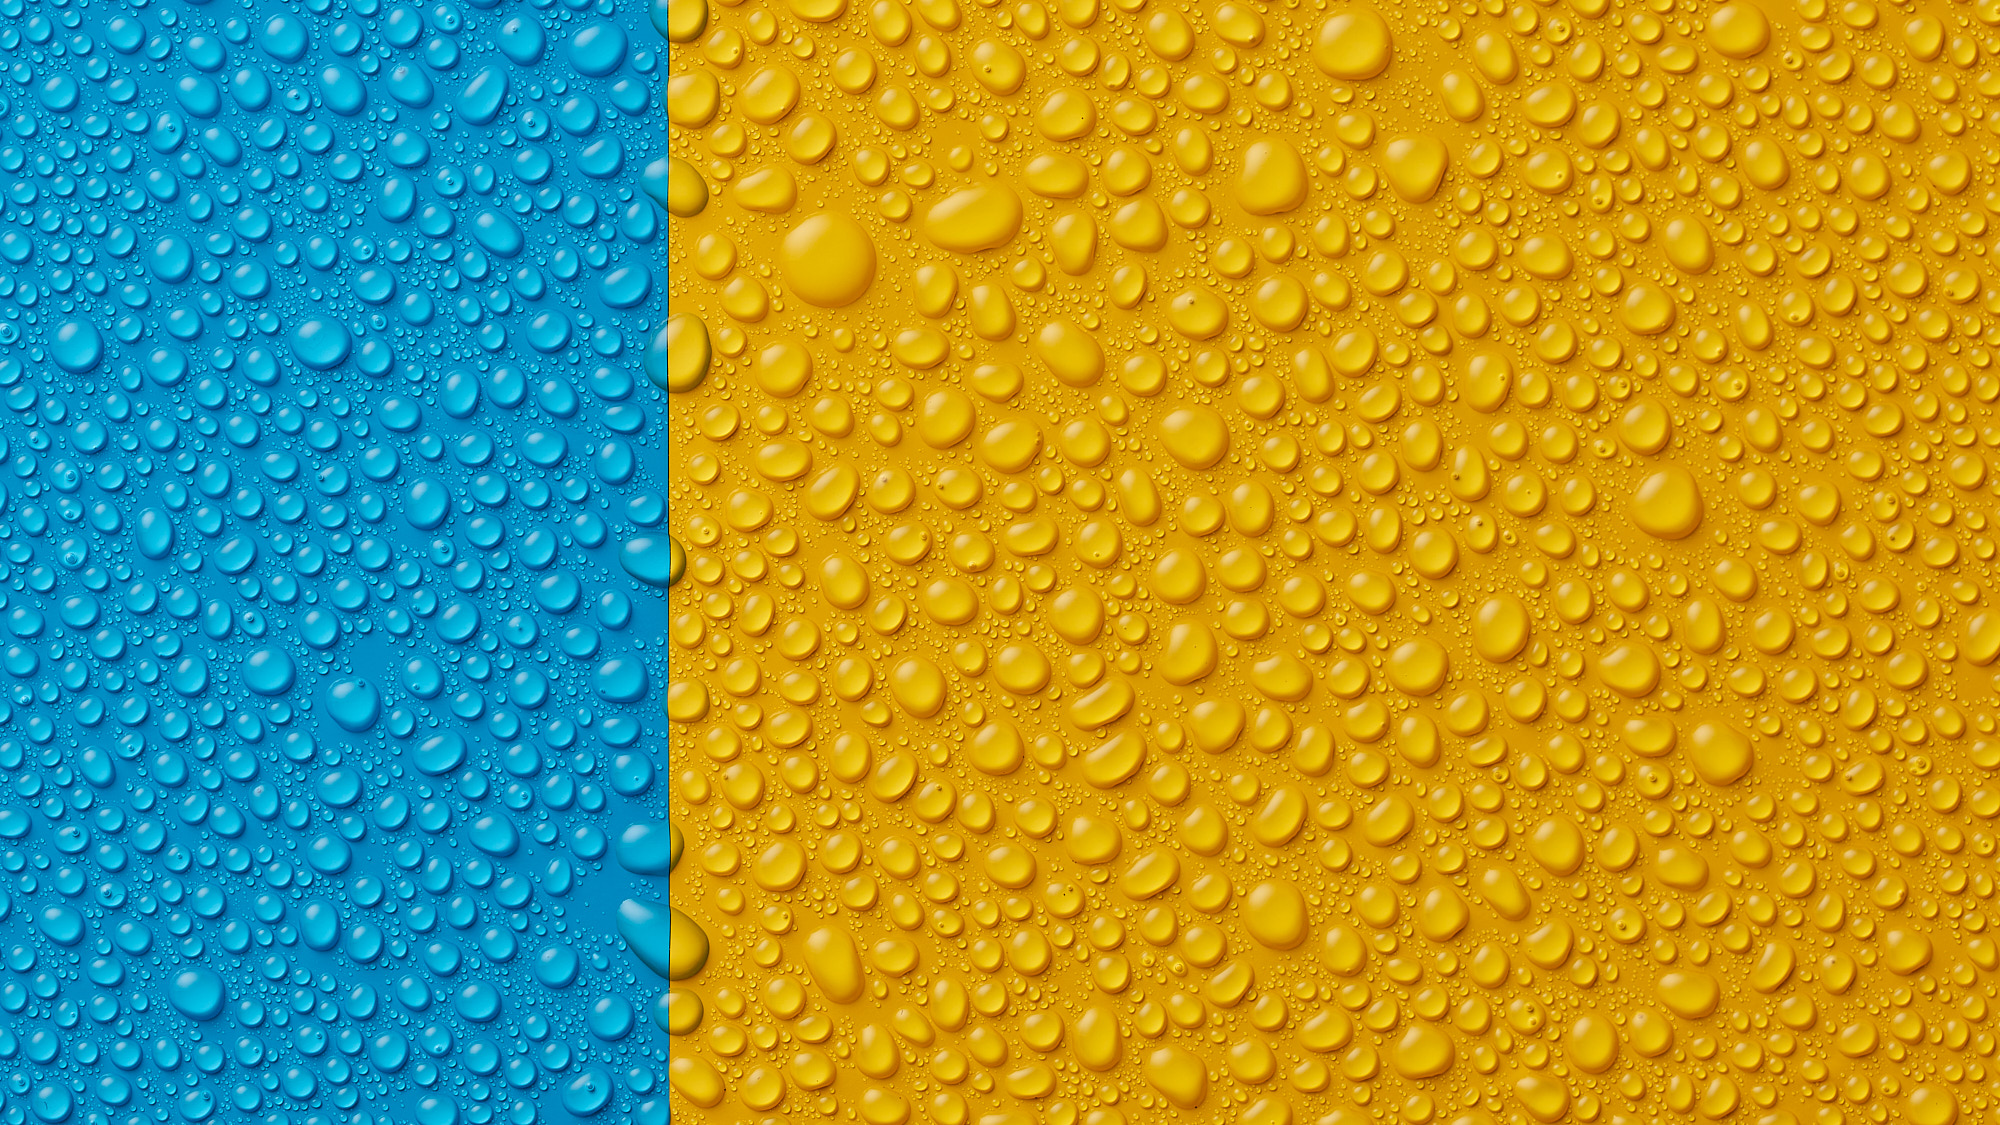 Fine art photo of water droplets on colored acrylic surface